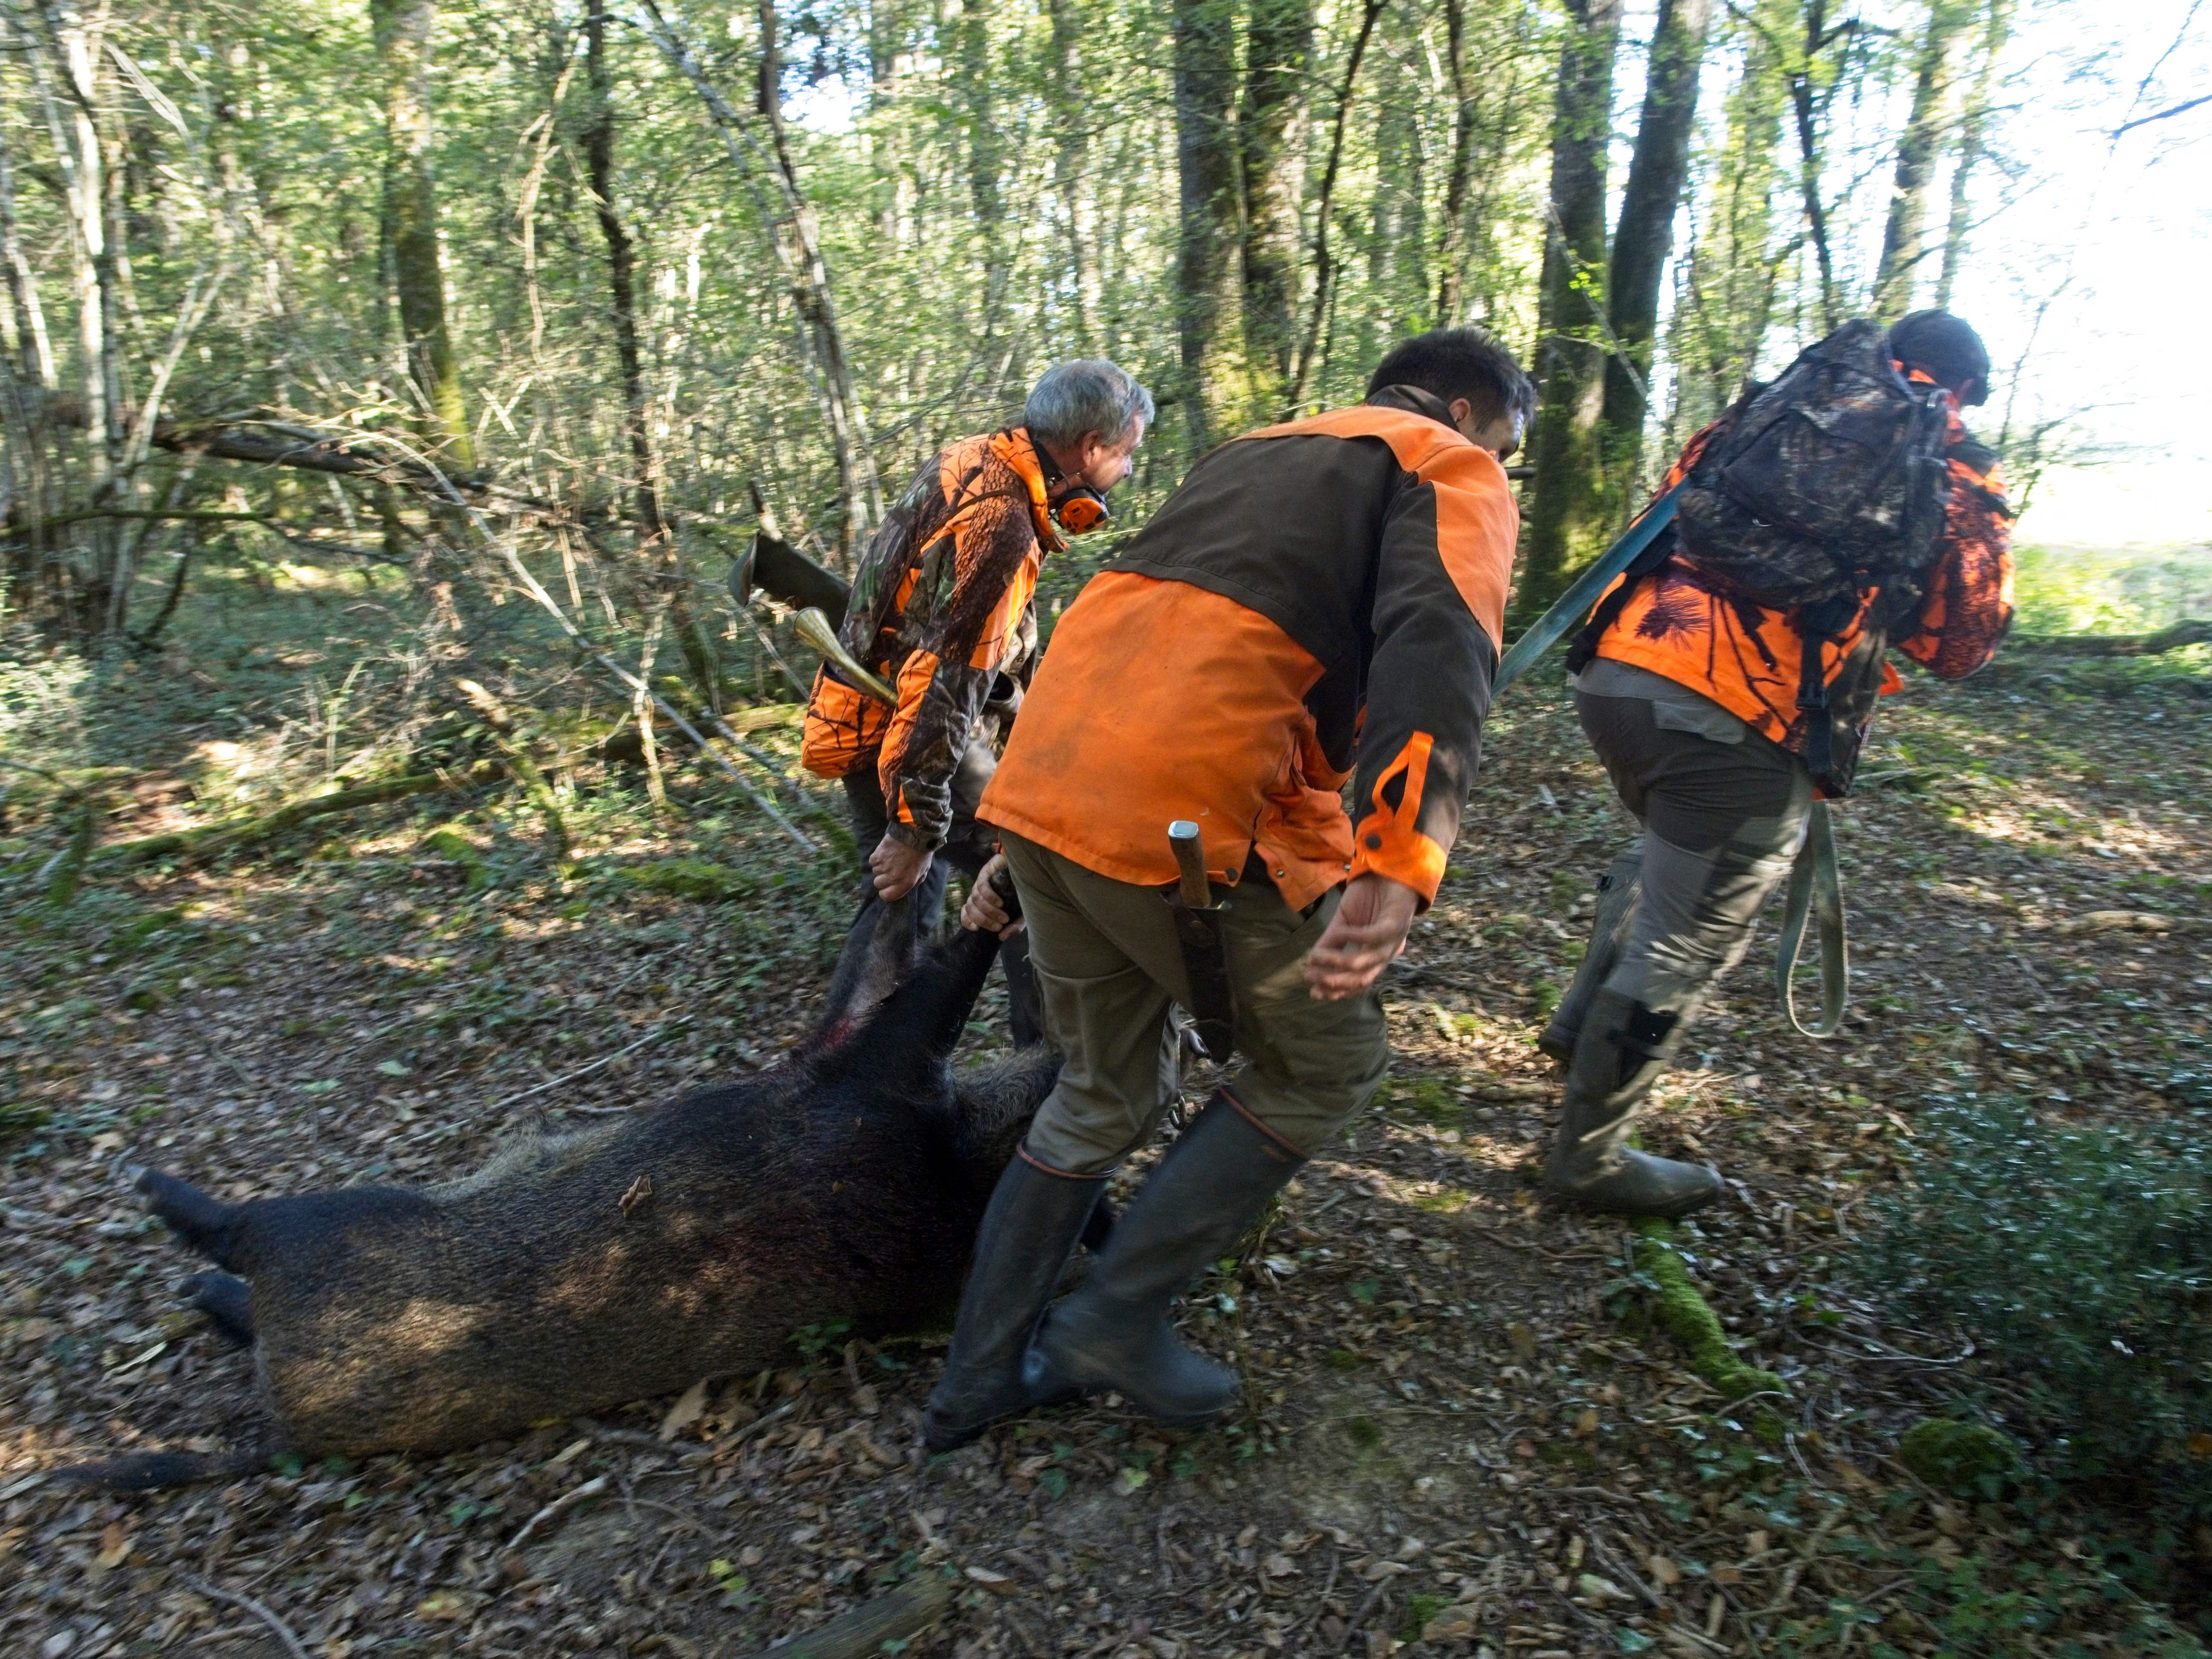 File photo: Hunters carry a killed boar on the opening day of France’s hunting season near Neuille-Pont-Pierre, central France on 18 September